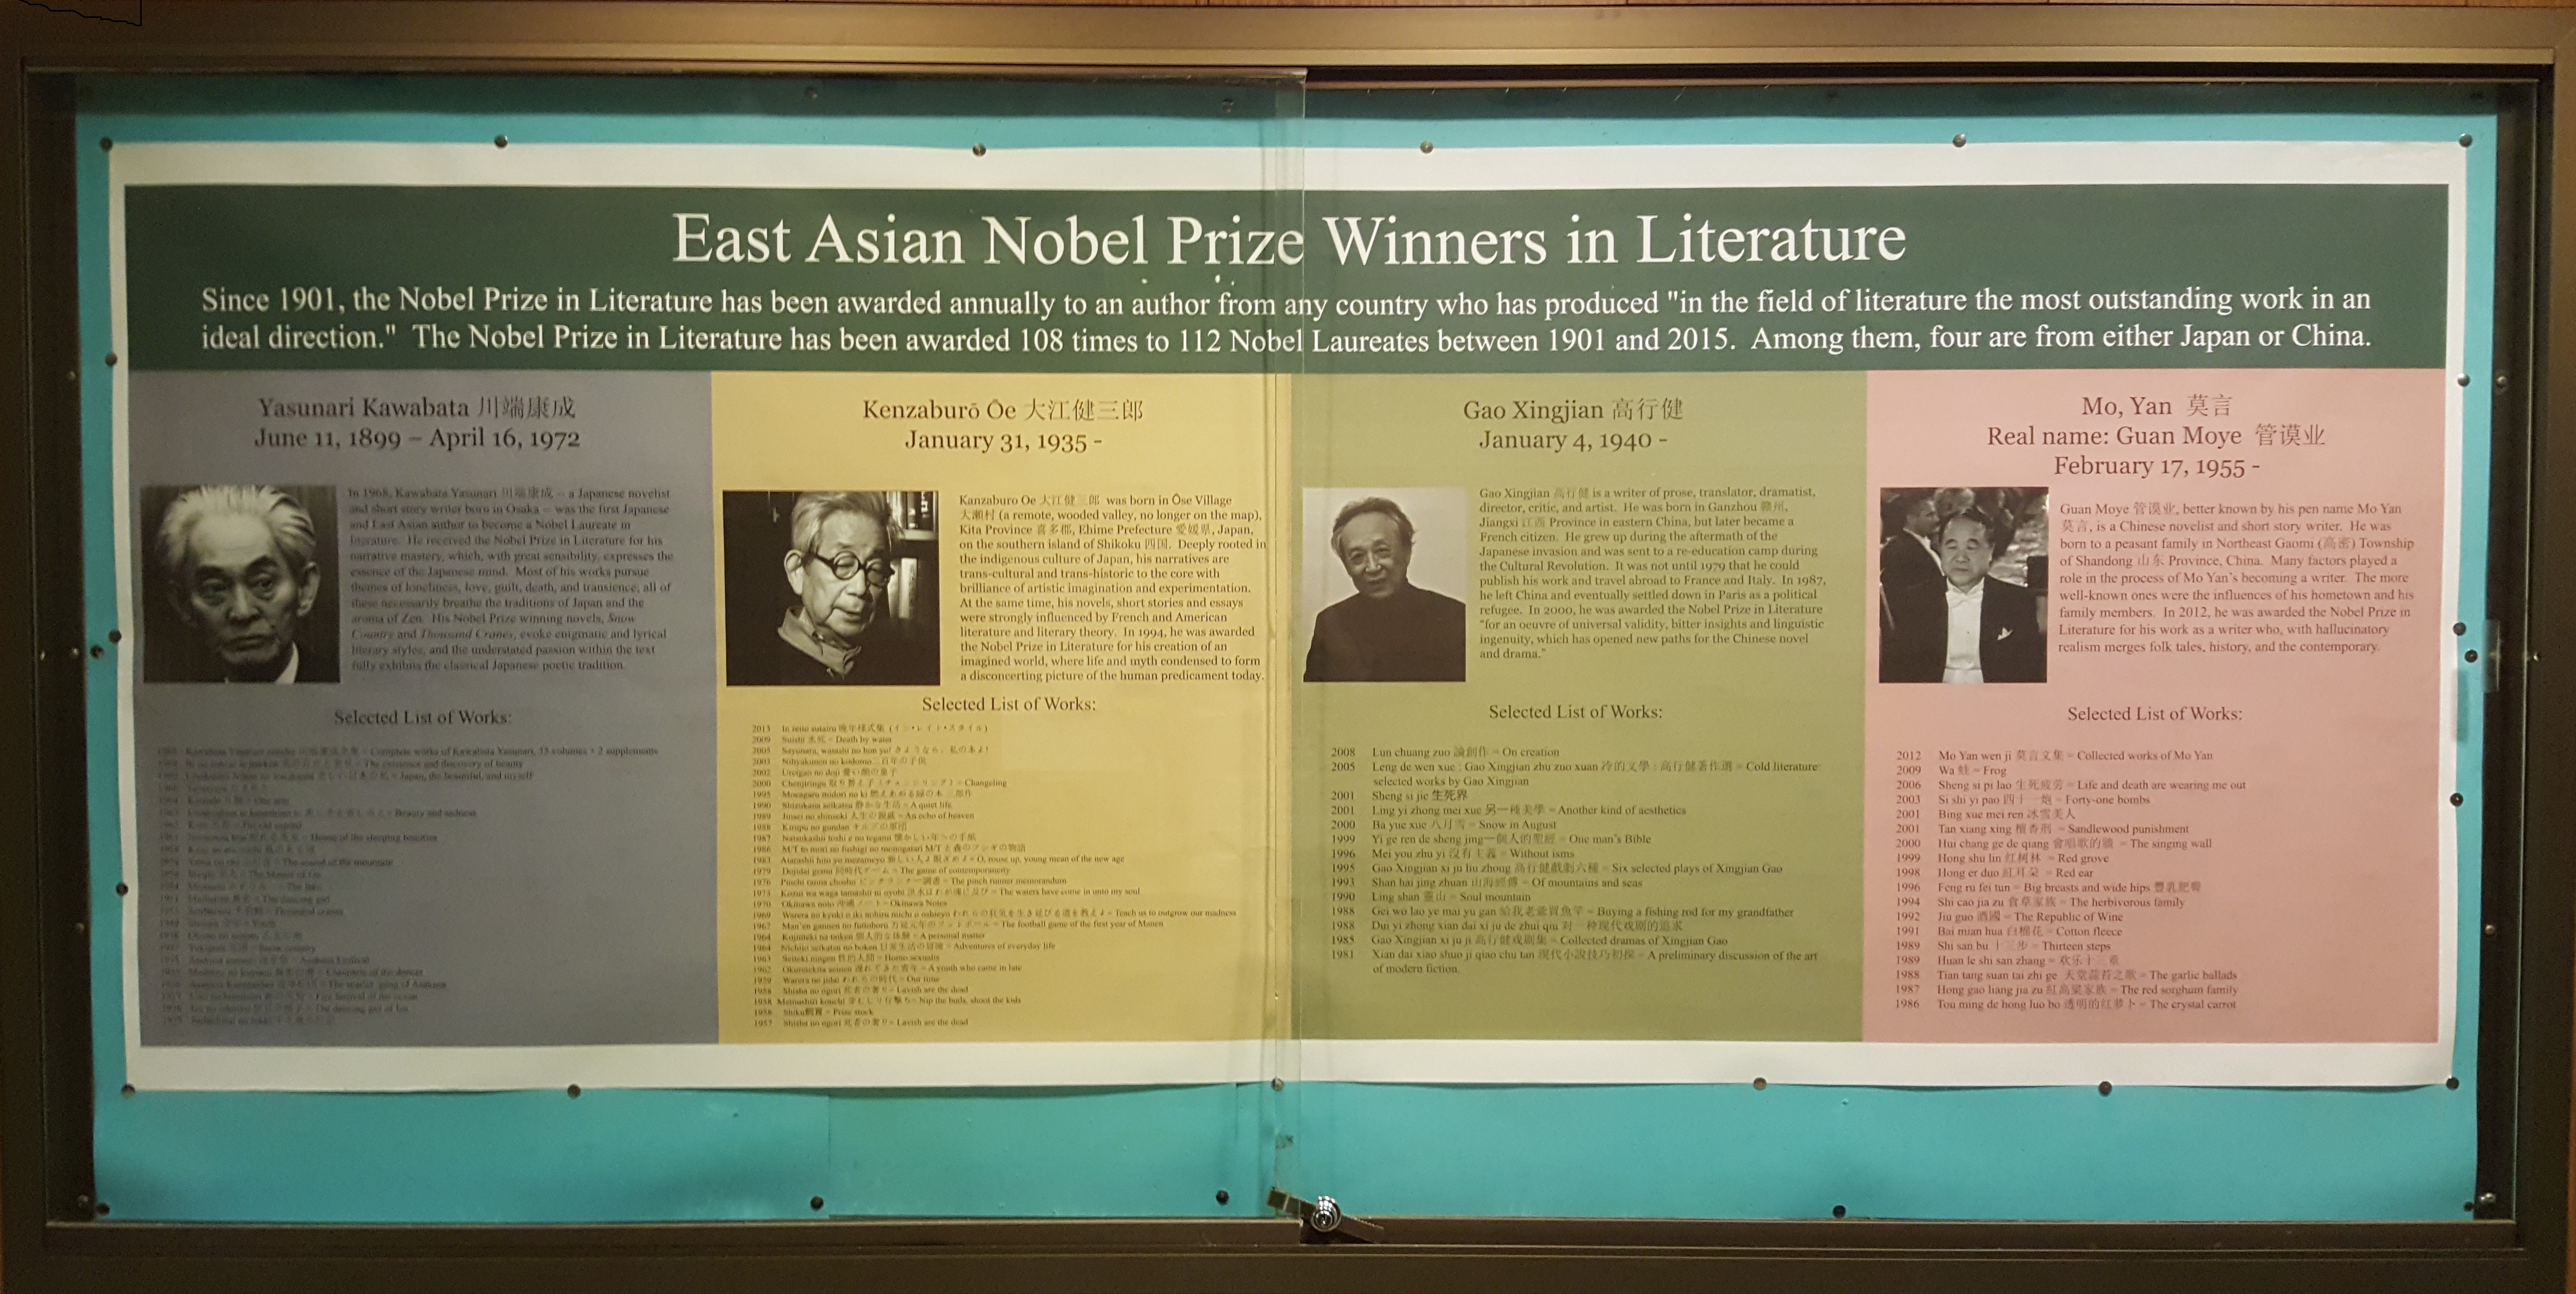 The poster, "East Asian Nobel Prize Winners in Literature" Indiana